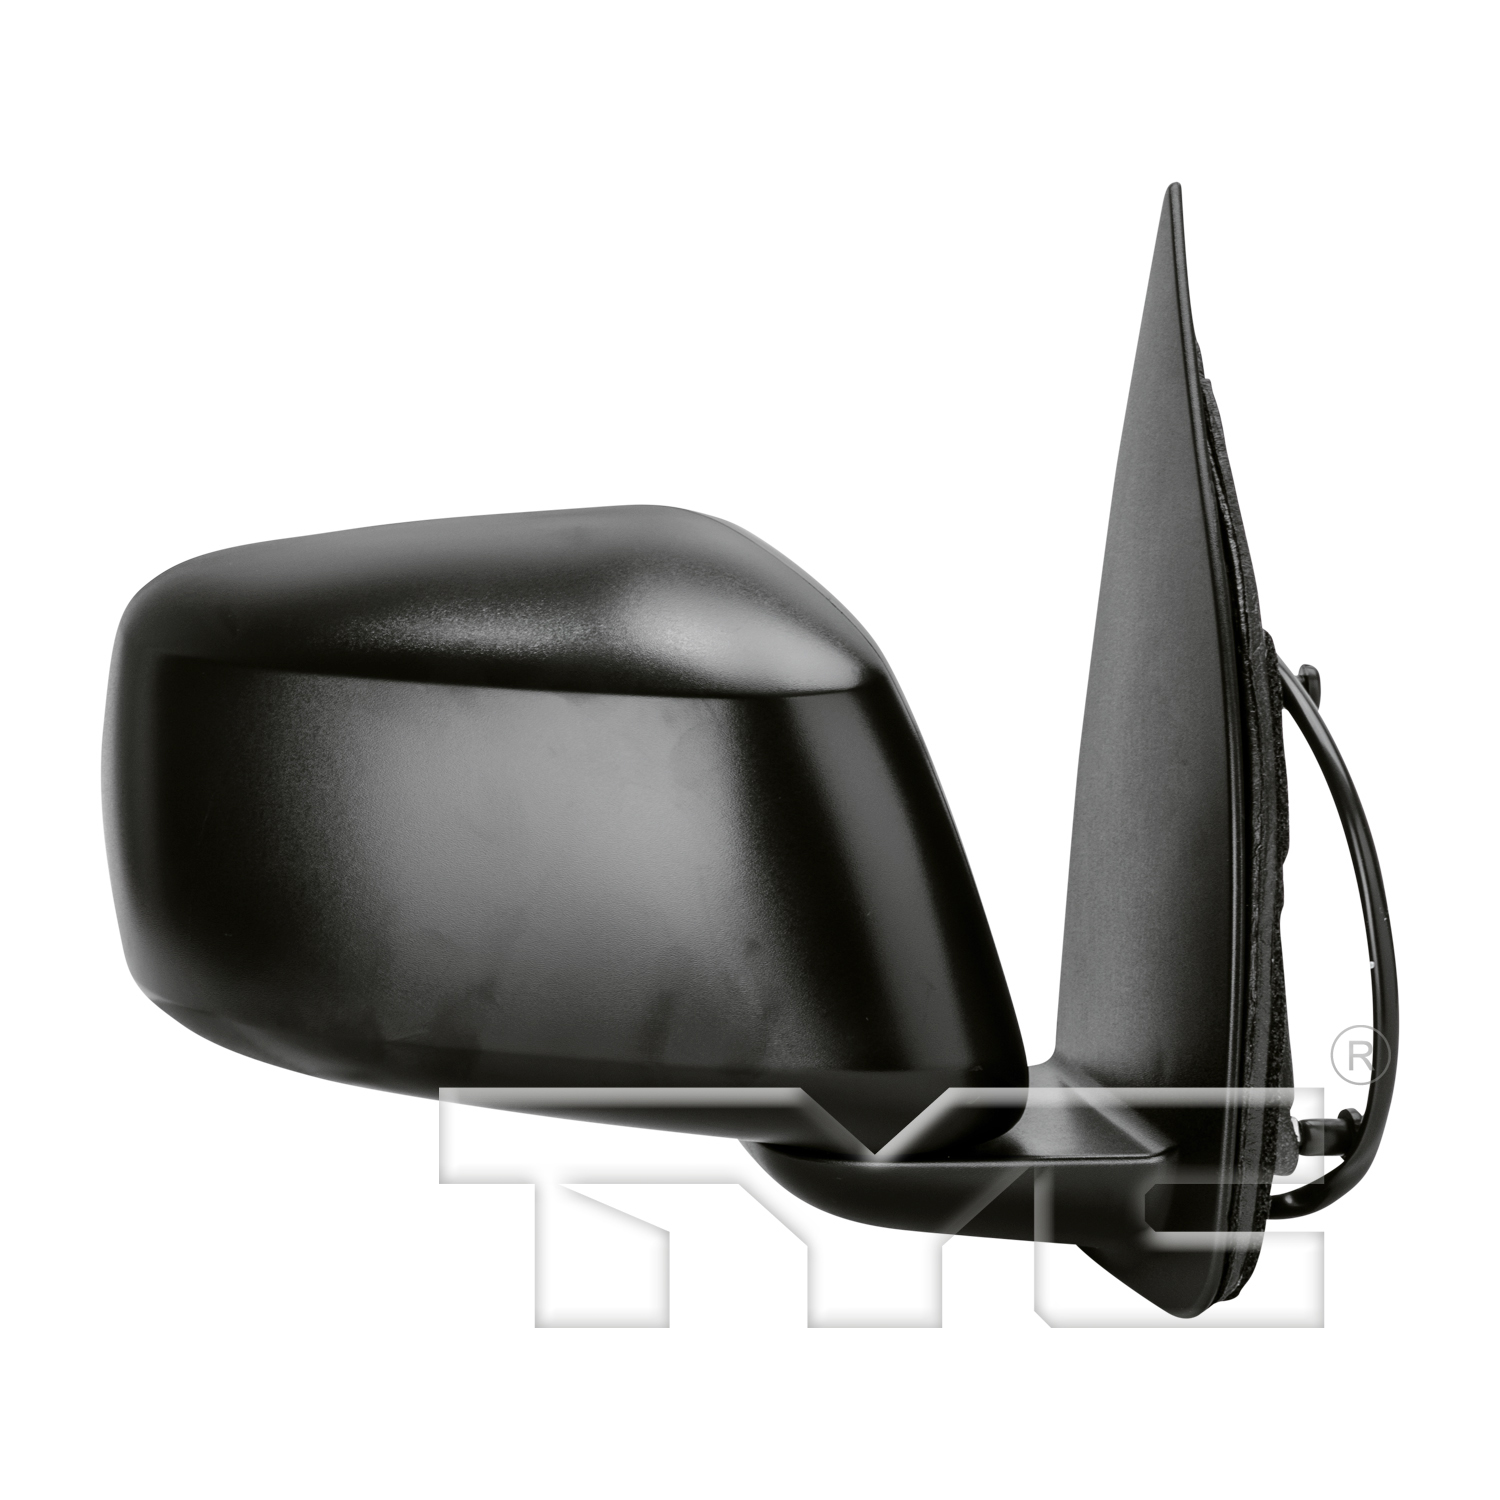 Aftermarket MIRRORS for NISSAN - PATHFINDER, PATHFINDER,05-12,RT Mirror outside rear view